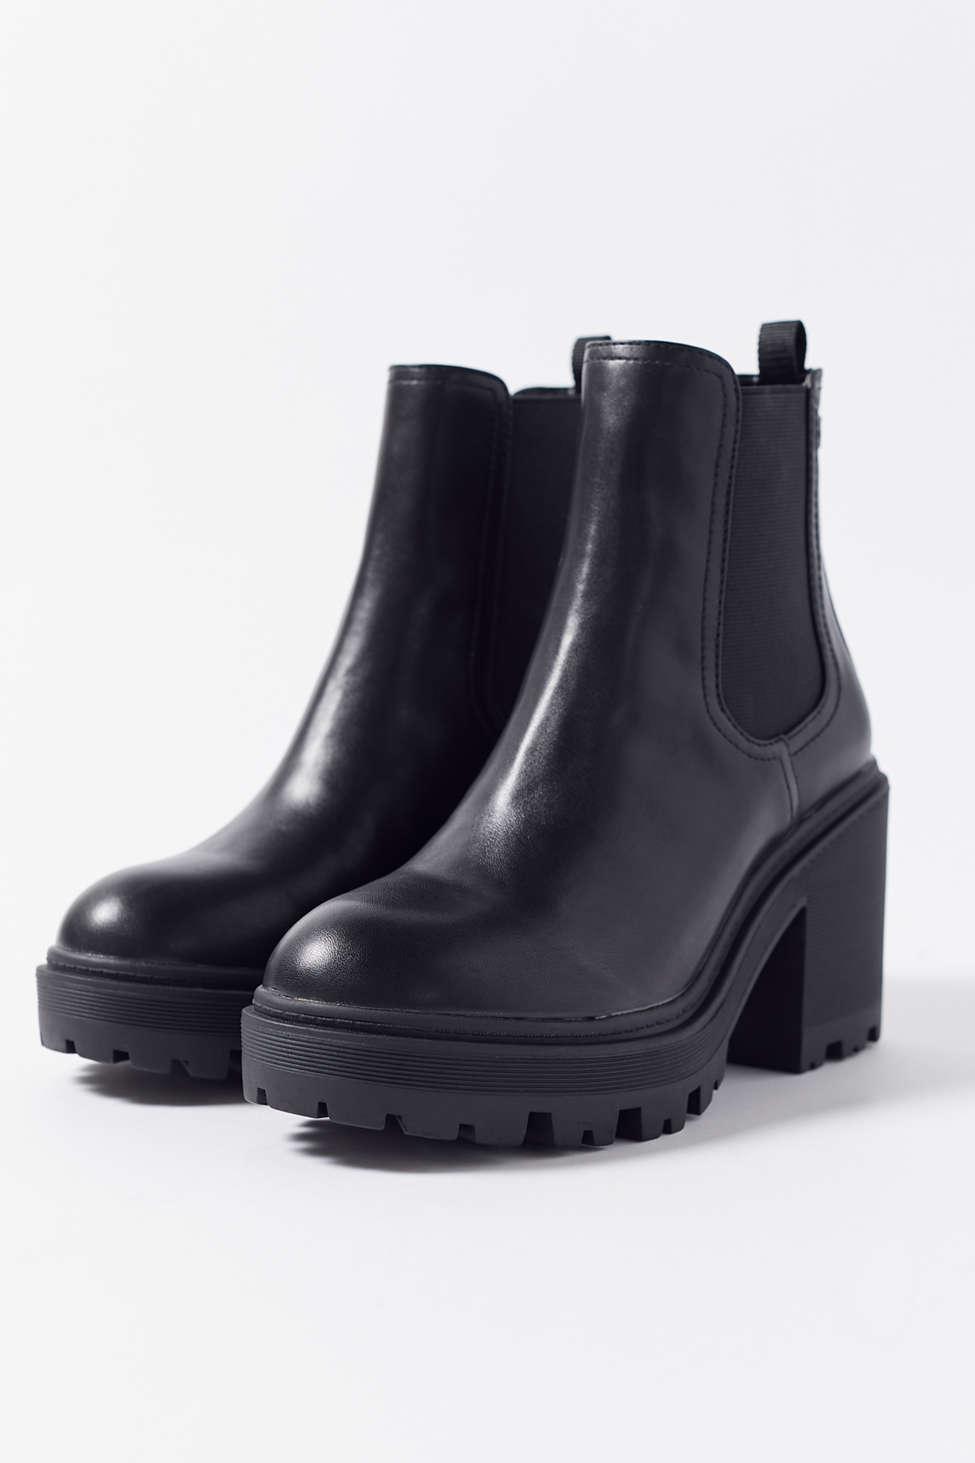 Urban Outfitters Uo Chloe Chelsea Timeless Classic Boot in Black - Lyst